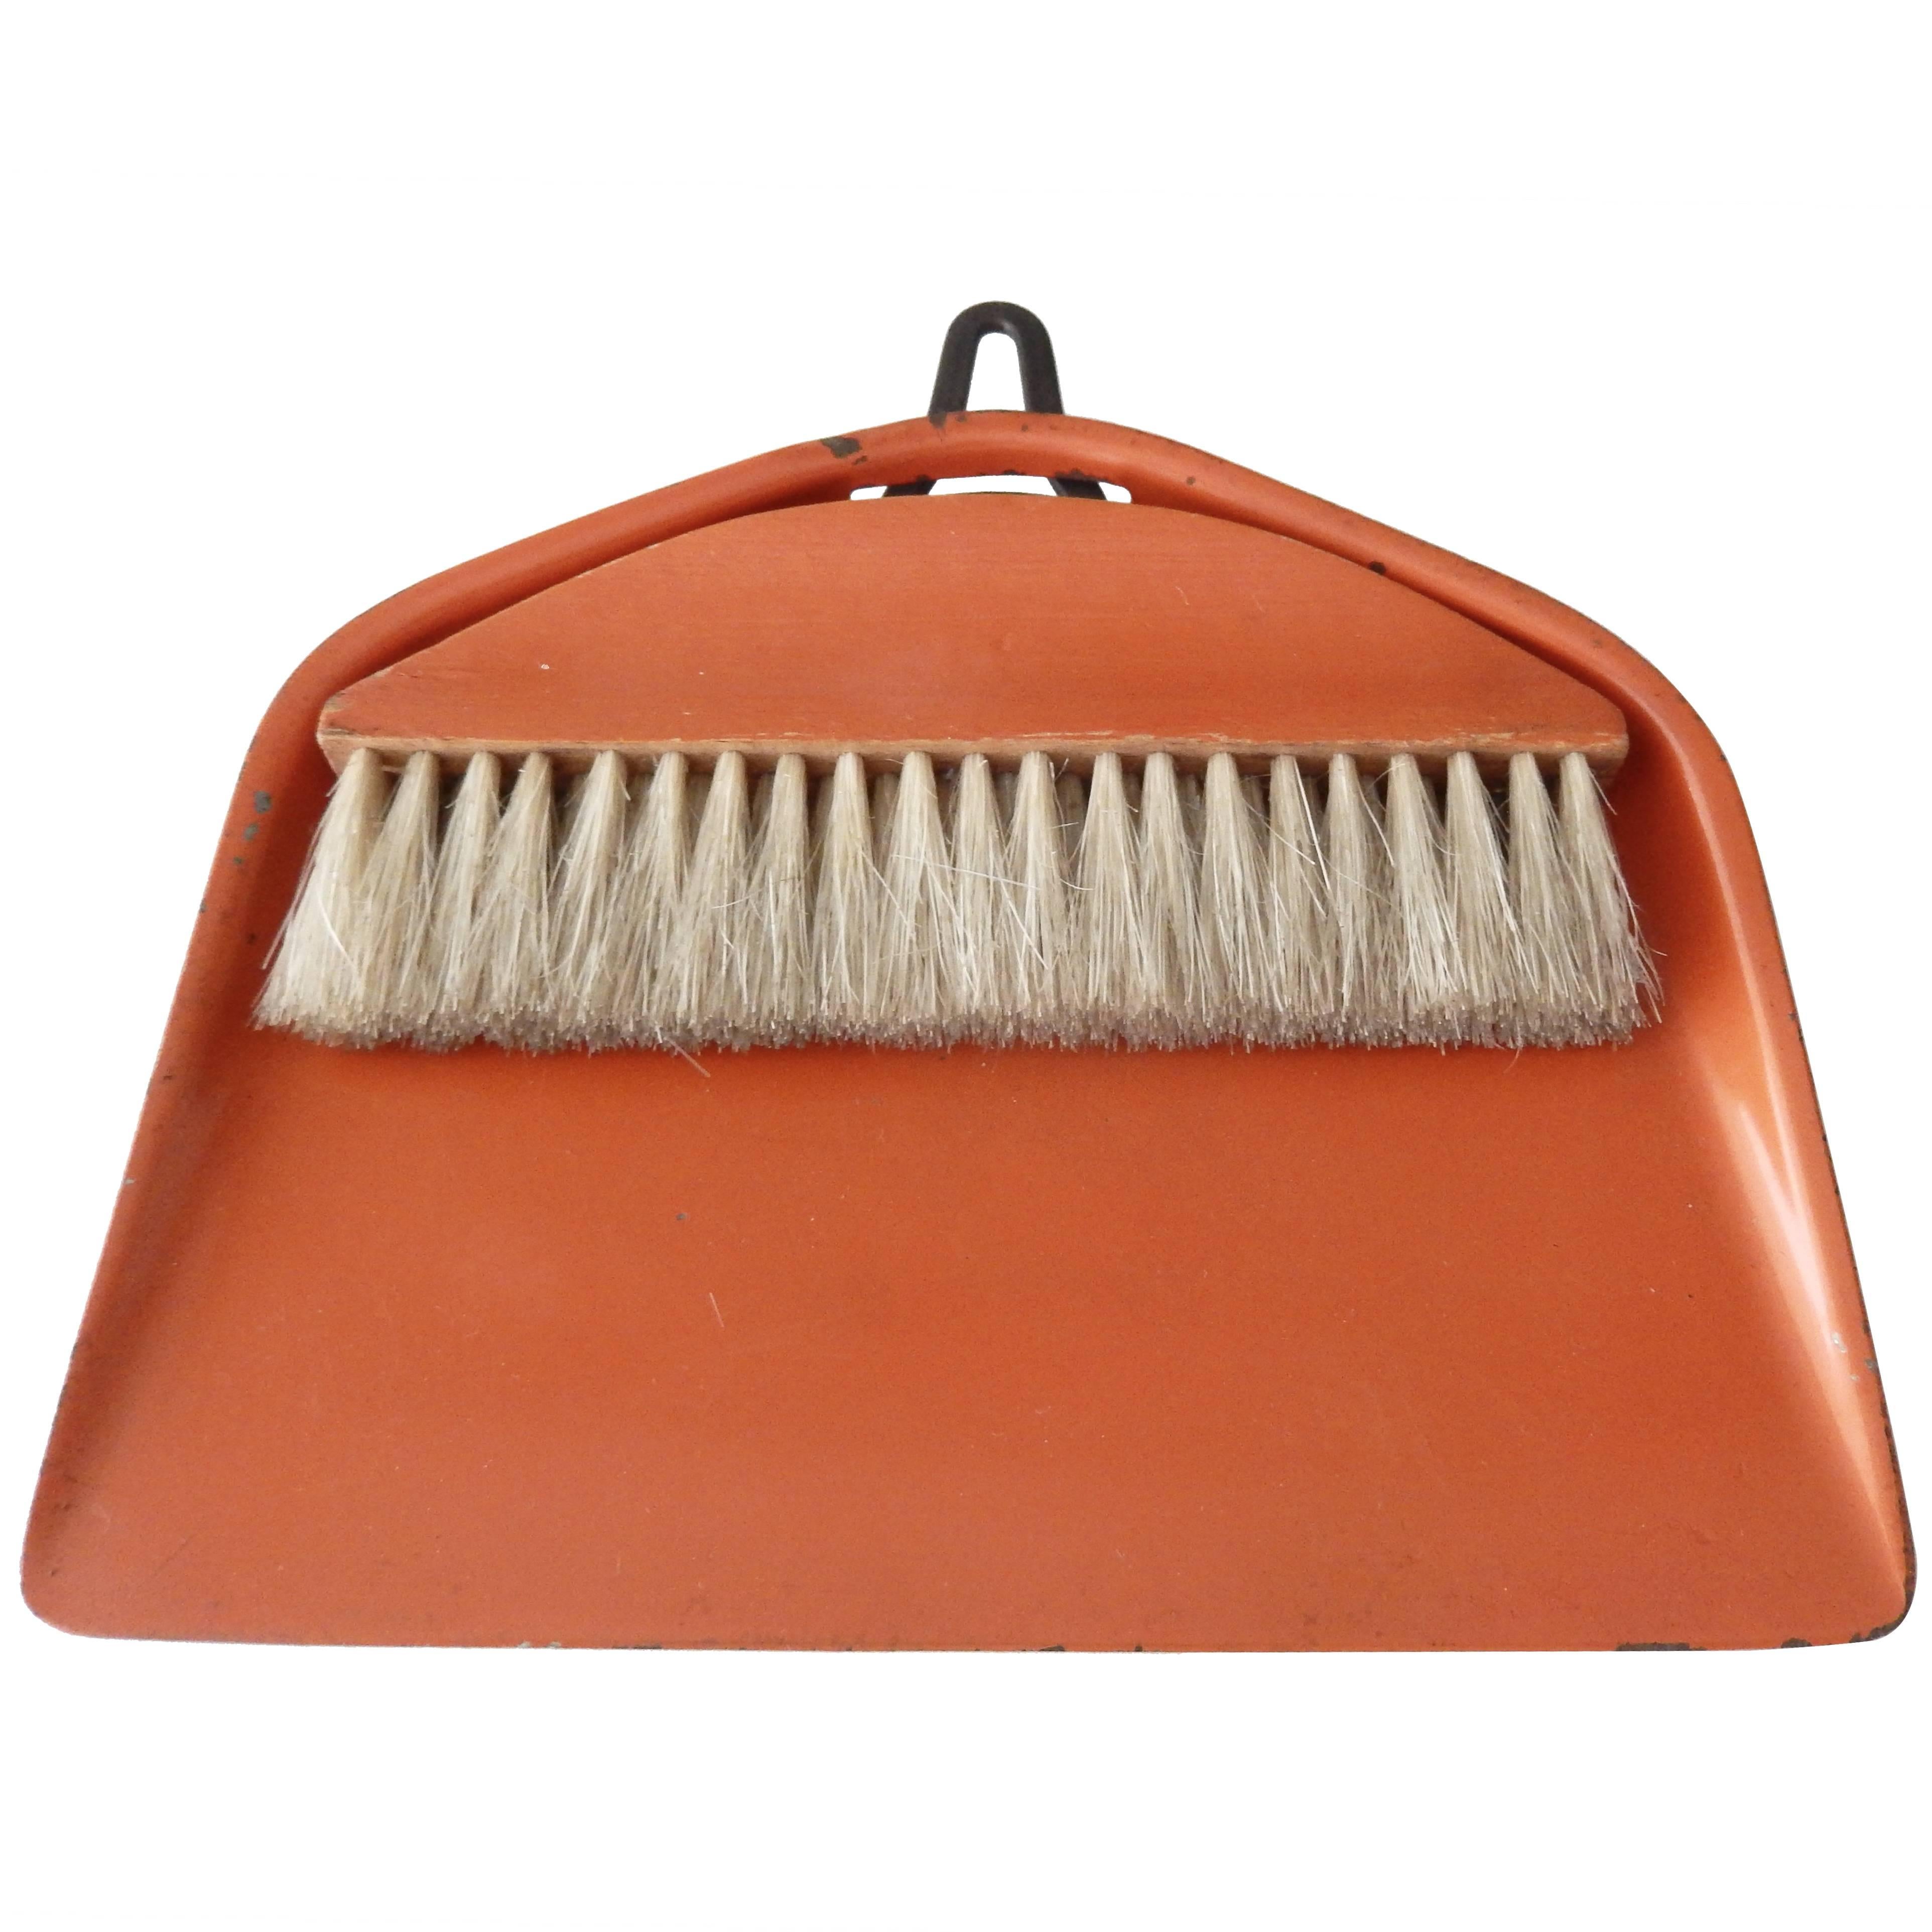 Bauhaus/Marianne Brandt Modernist Crumb Brush and Tray, circa 1929 For Sale